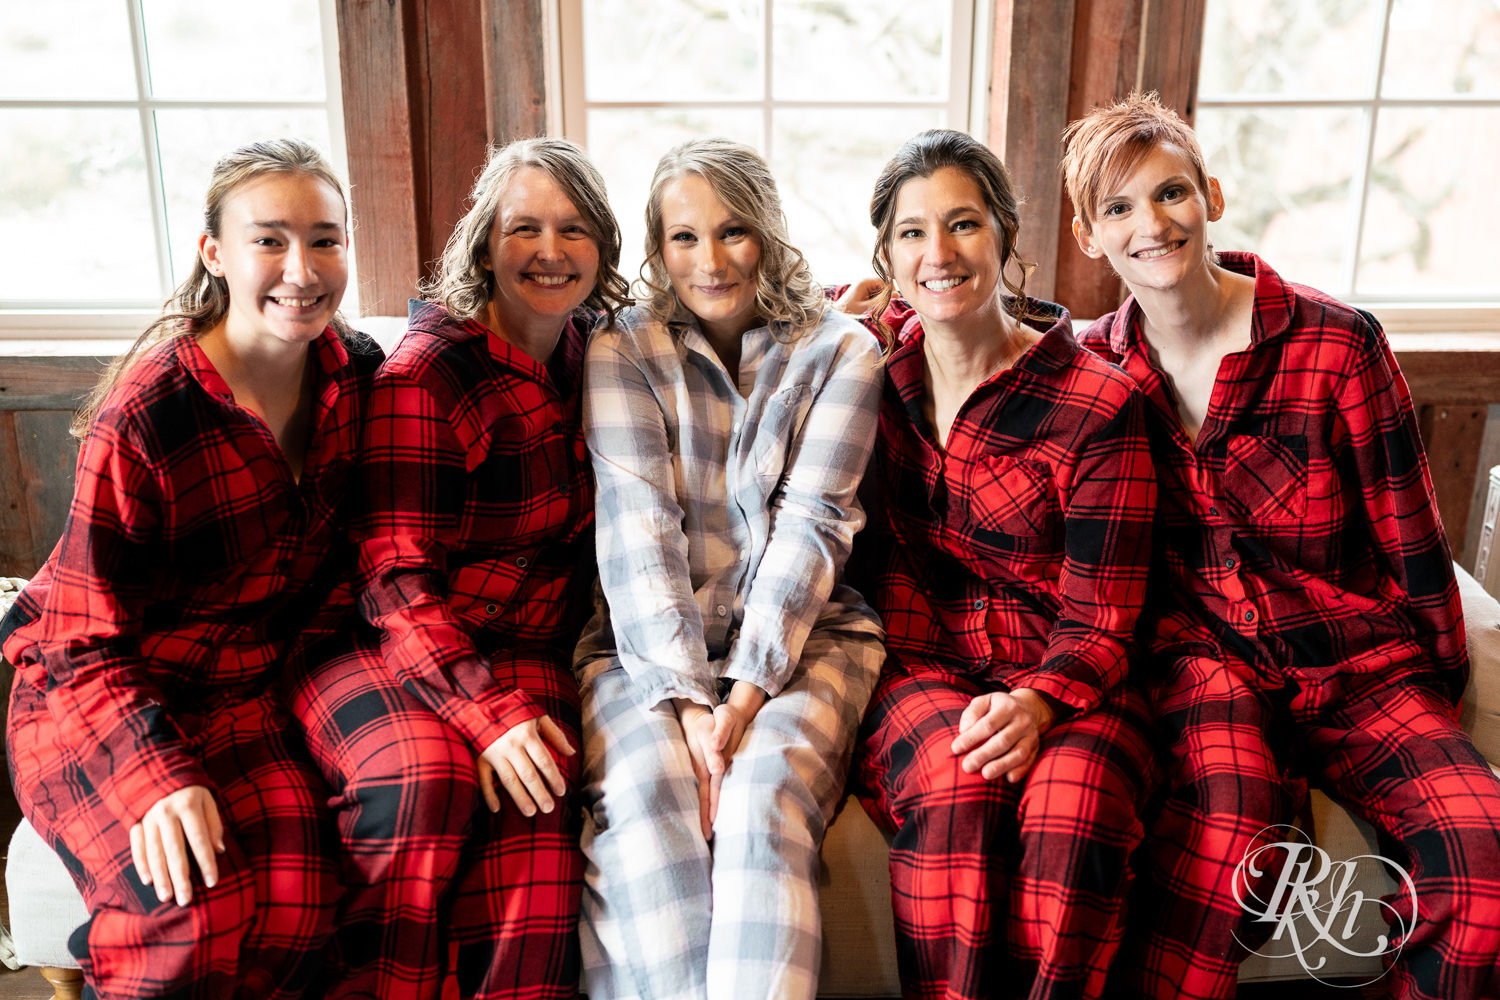 Bride snuggles with bridesmaids in flannel pajamas on wedding day at Almquist Farm in Hastings, Minnesota.